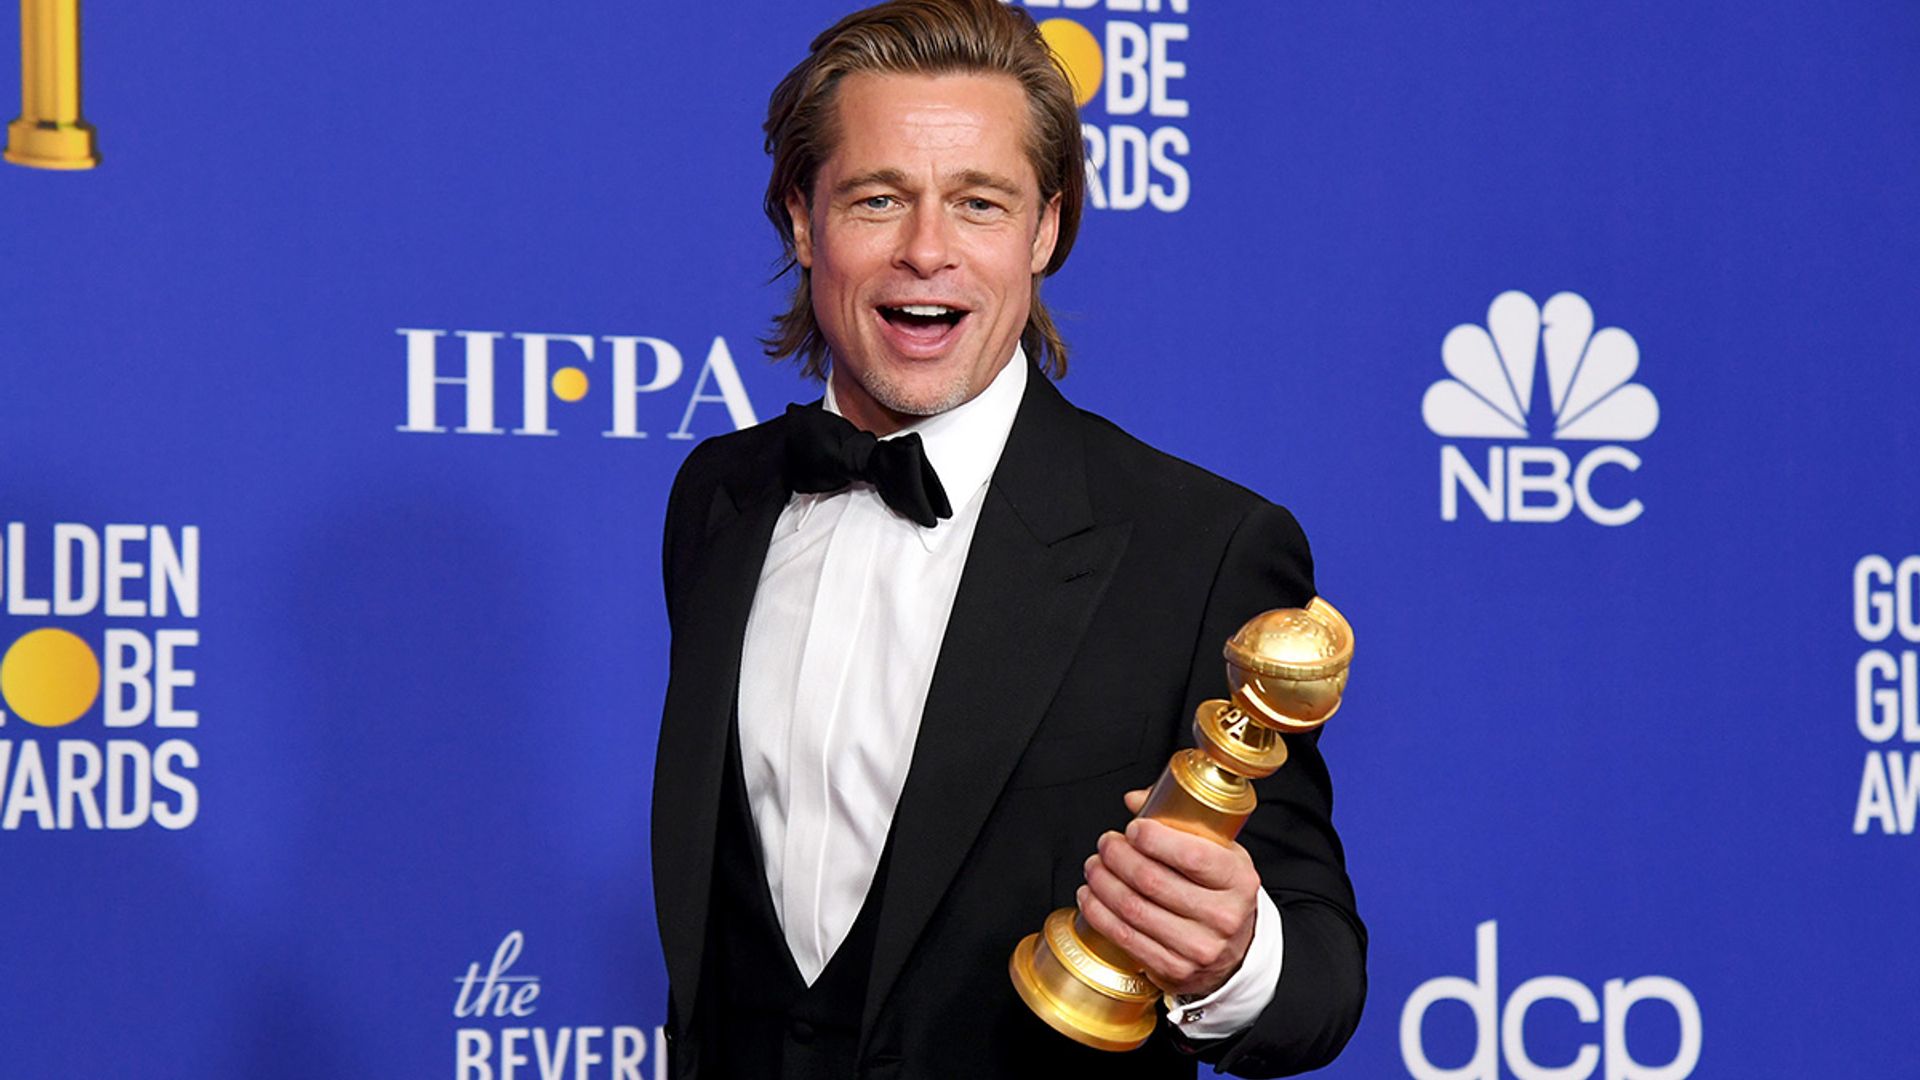 Everything you need to know about the 2021 Golden Globe Awards